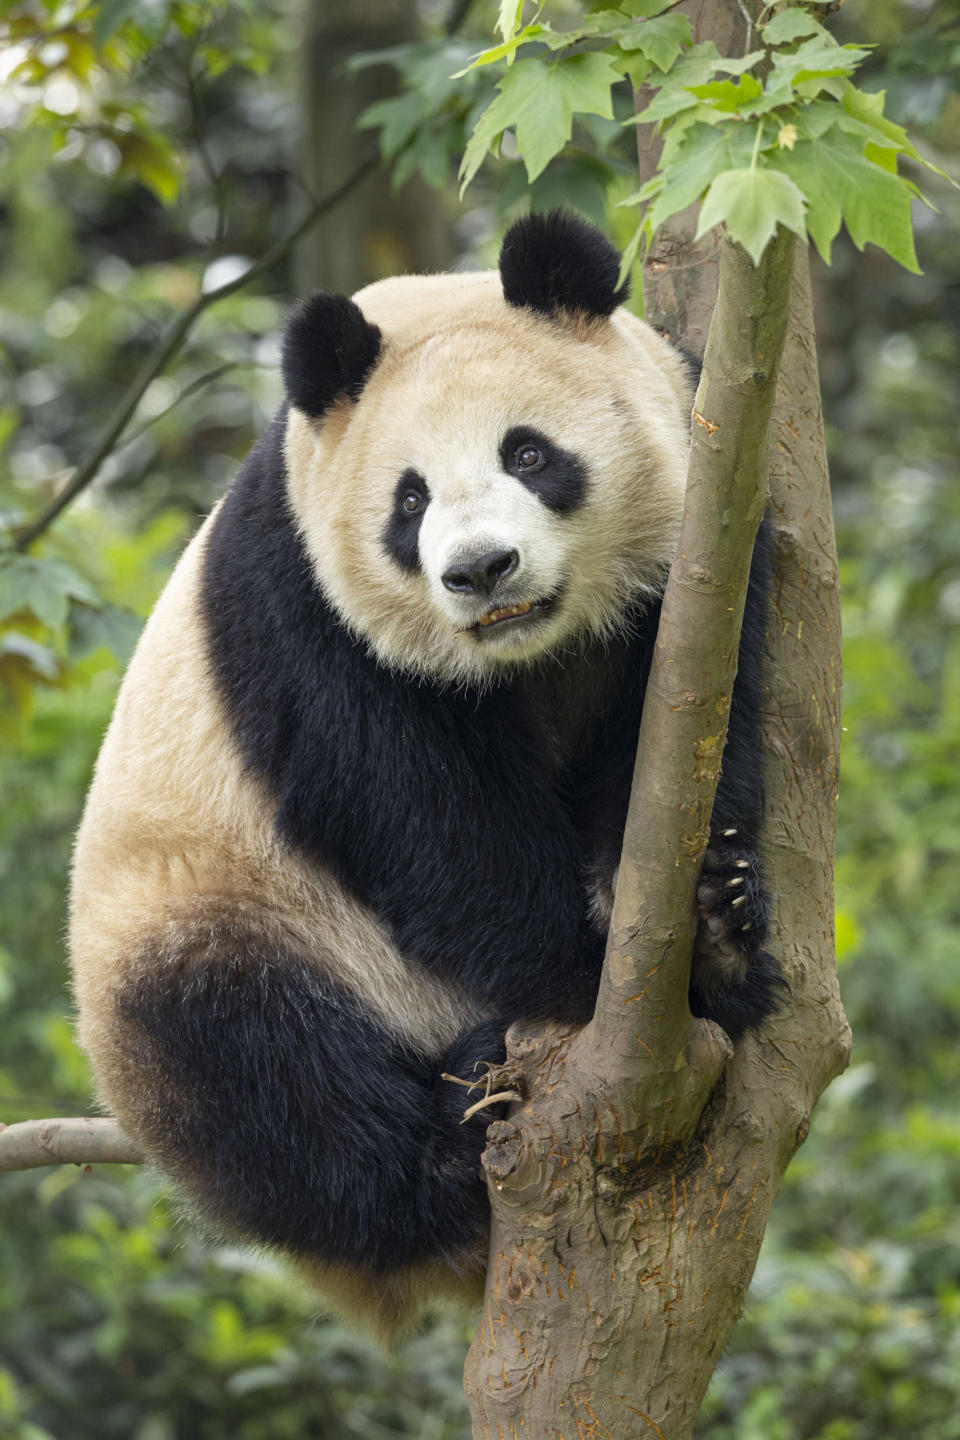 This photo released by the San Diego Zoo shows giant panda Xin Bao on Thursday, April 25, 2024, in the Sichuan province of China. A pair of giant pandas will soon make the journey from China to the U.S., where they will be cared for at the San Diego Zoo as part of an ongoing conservation partnership between the two nations, officials said Monday, April 29. (Ken Bohn/San Diego Zoo via AP)